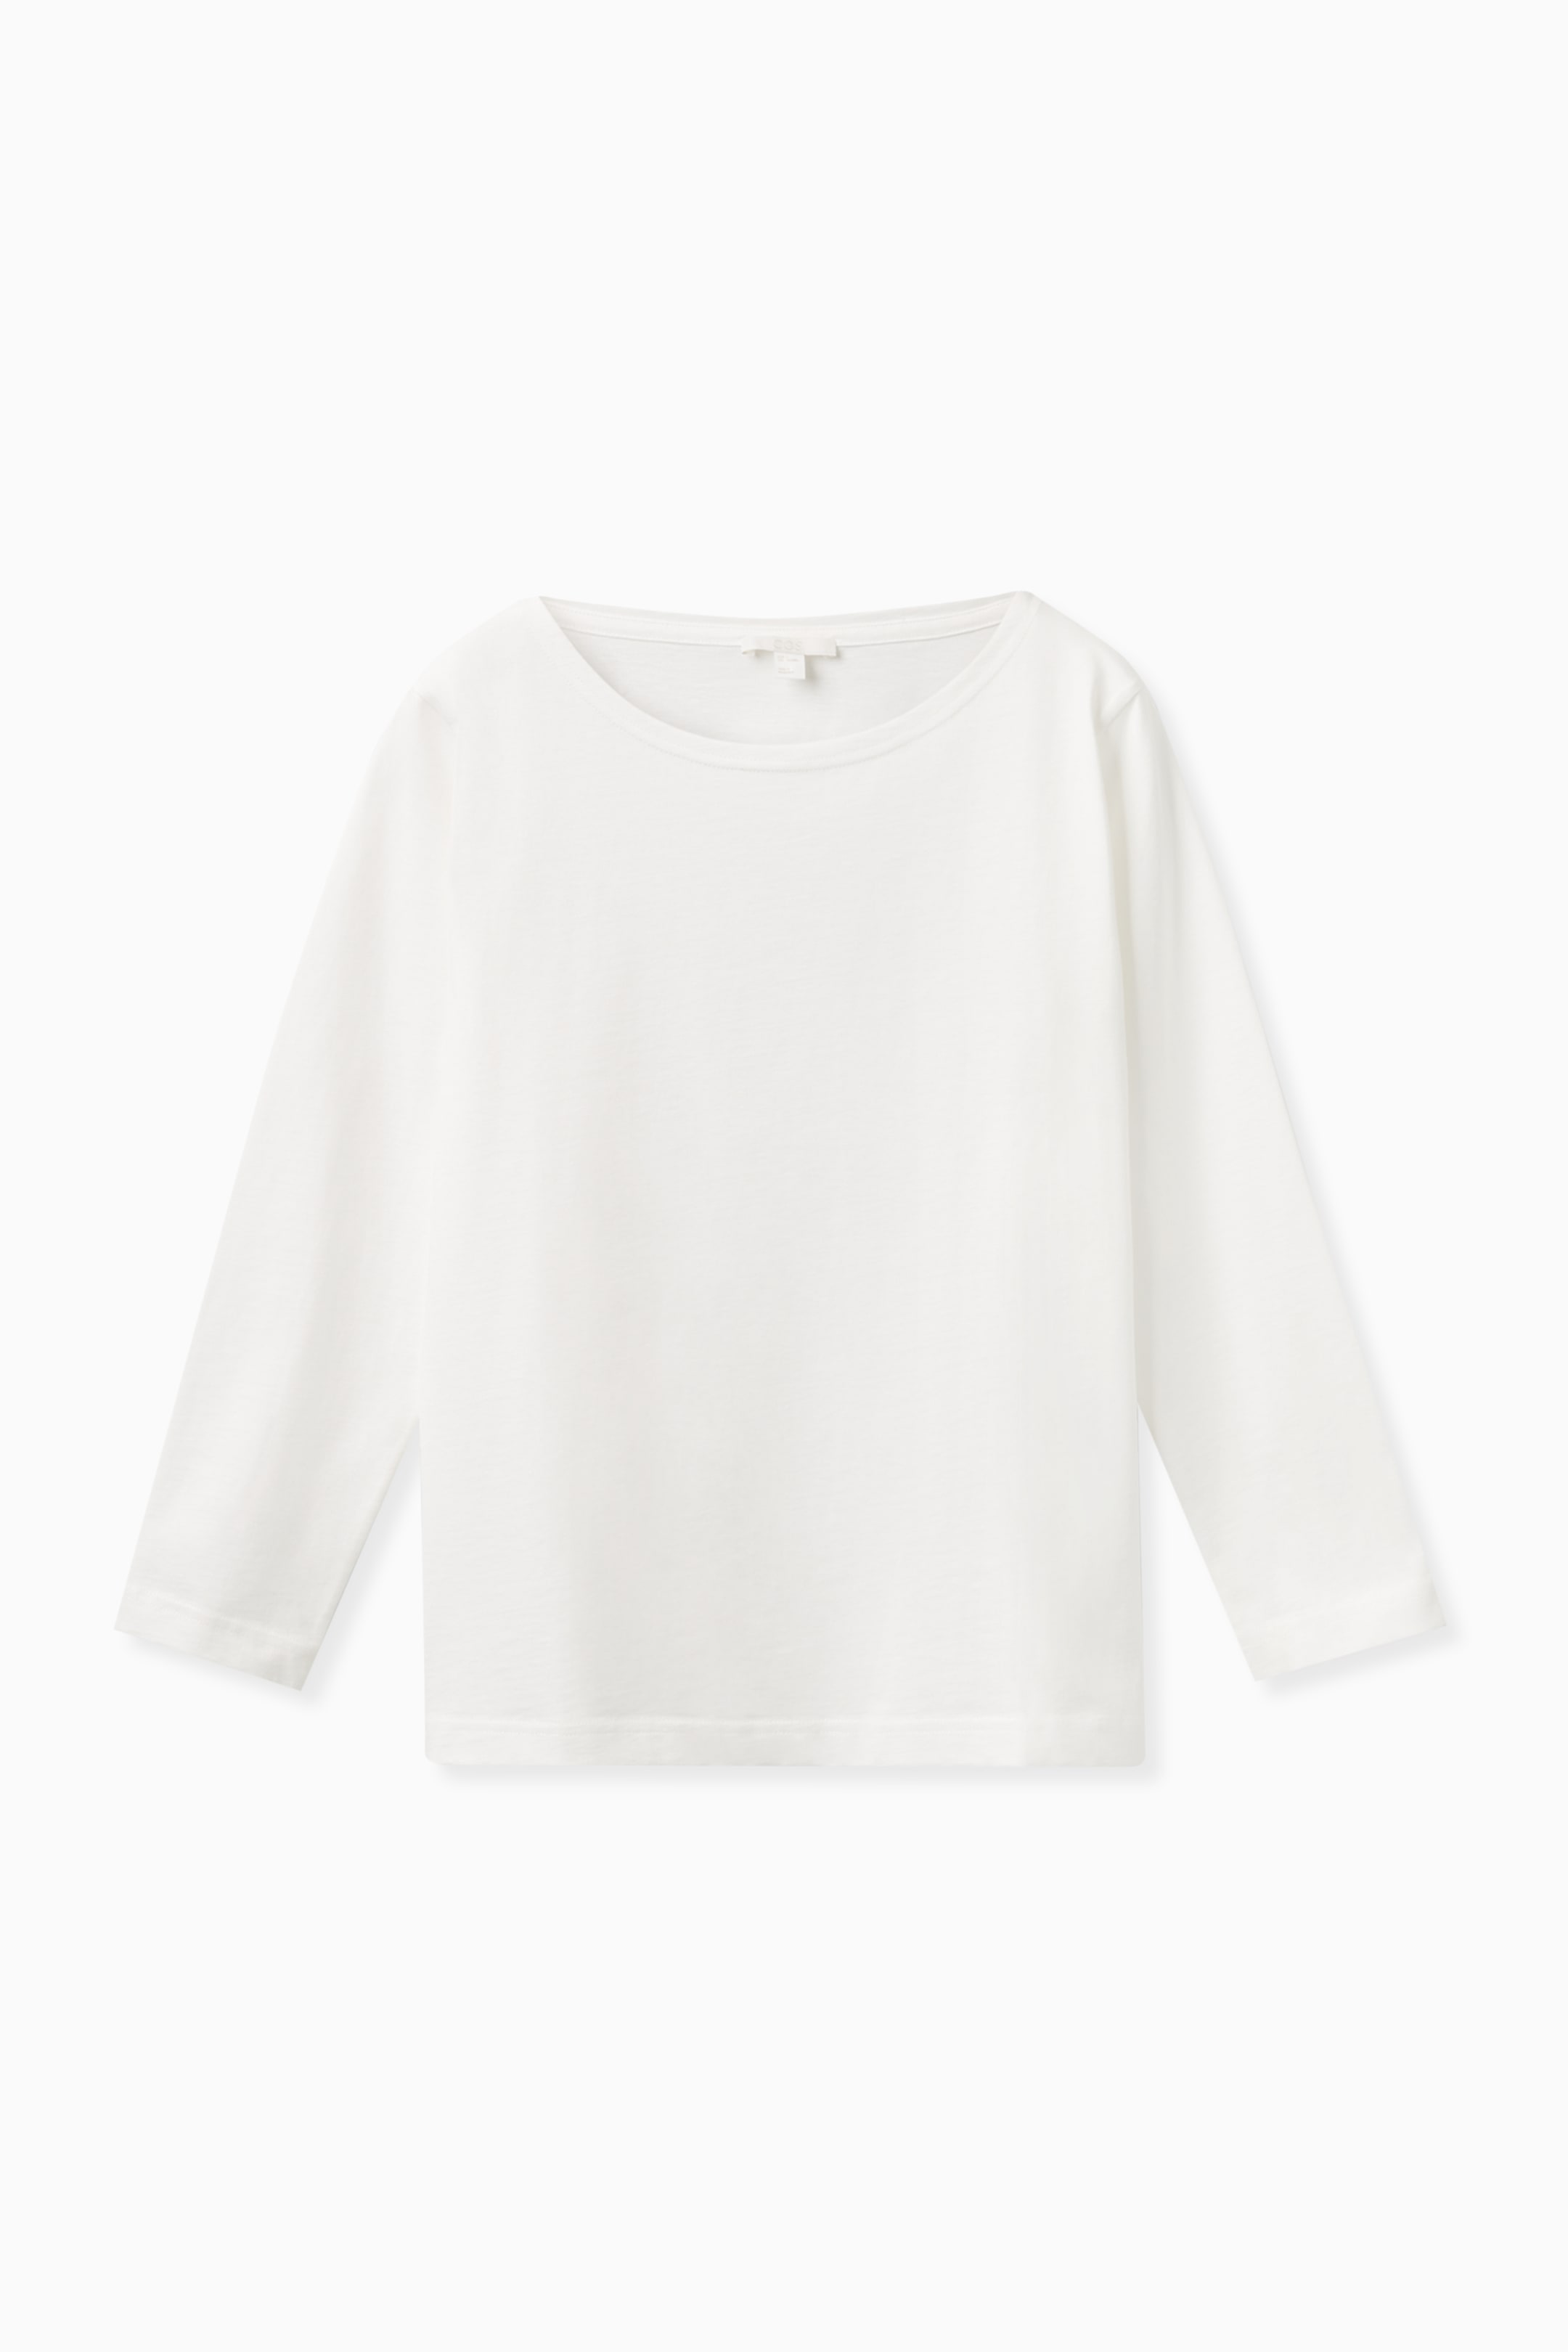 Front image of cos BOAT NECK TOP in WHITE